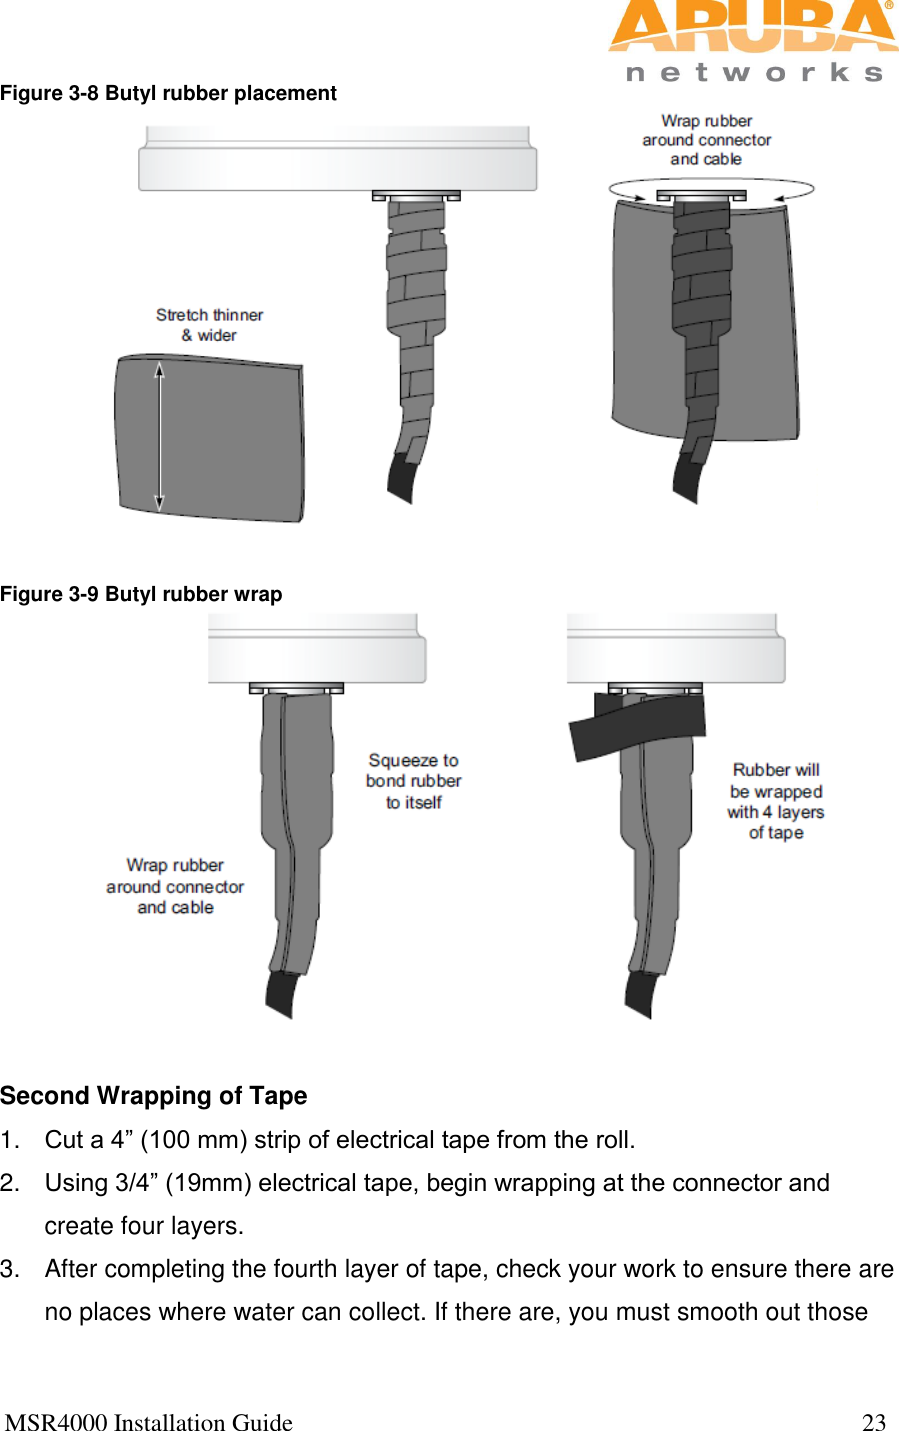  MSR4000 Installation Guide                                                                                           23  Figure 3-8 Butyl rubber placement   Figure 3-9 Butyl rubber wrap   Second Wrapping of Tape 1. Cut a 4” (100 mm) strip of electrical tape from the roll. 2. Using 3/4” (19mm) electrical tape, begin wrapping at the connector and create four layers. 3.  After completing the fourth layer of tape, check your work to ensure there are no places where water can collect. If there are, you must smooth out those 